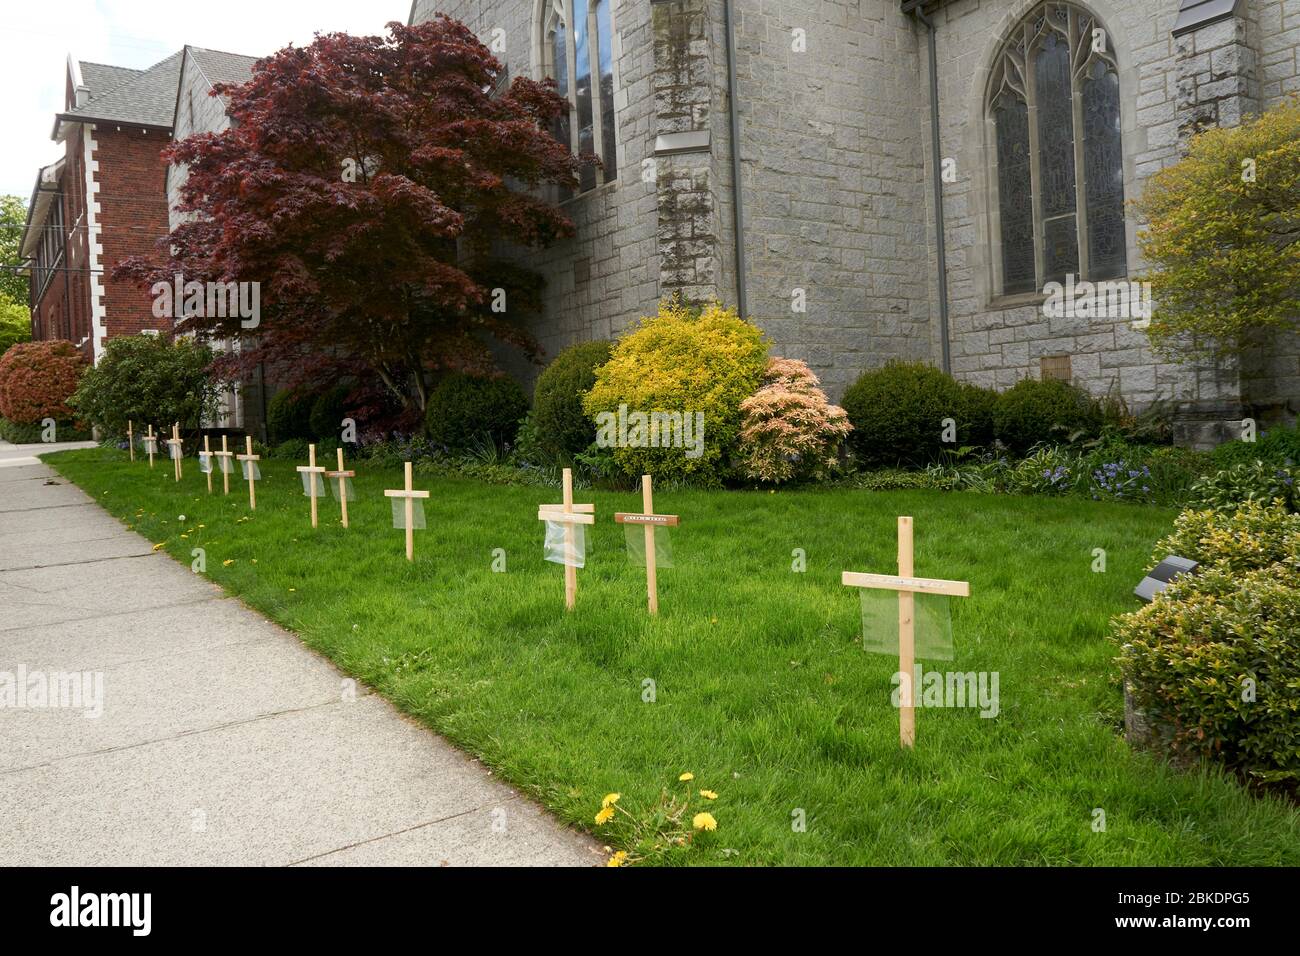 Vancouver, Canada, May 3,l 2020. A row of wooden crosses outside a church honor people who have died during the COVD-19 pandemic. Stock Photo